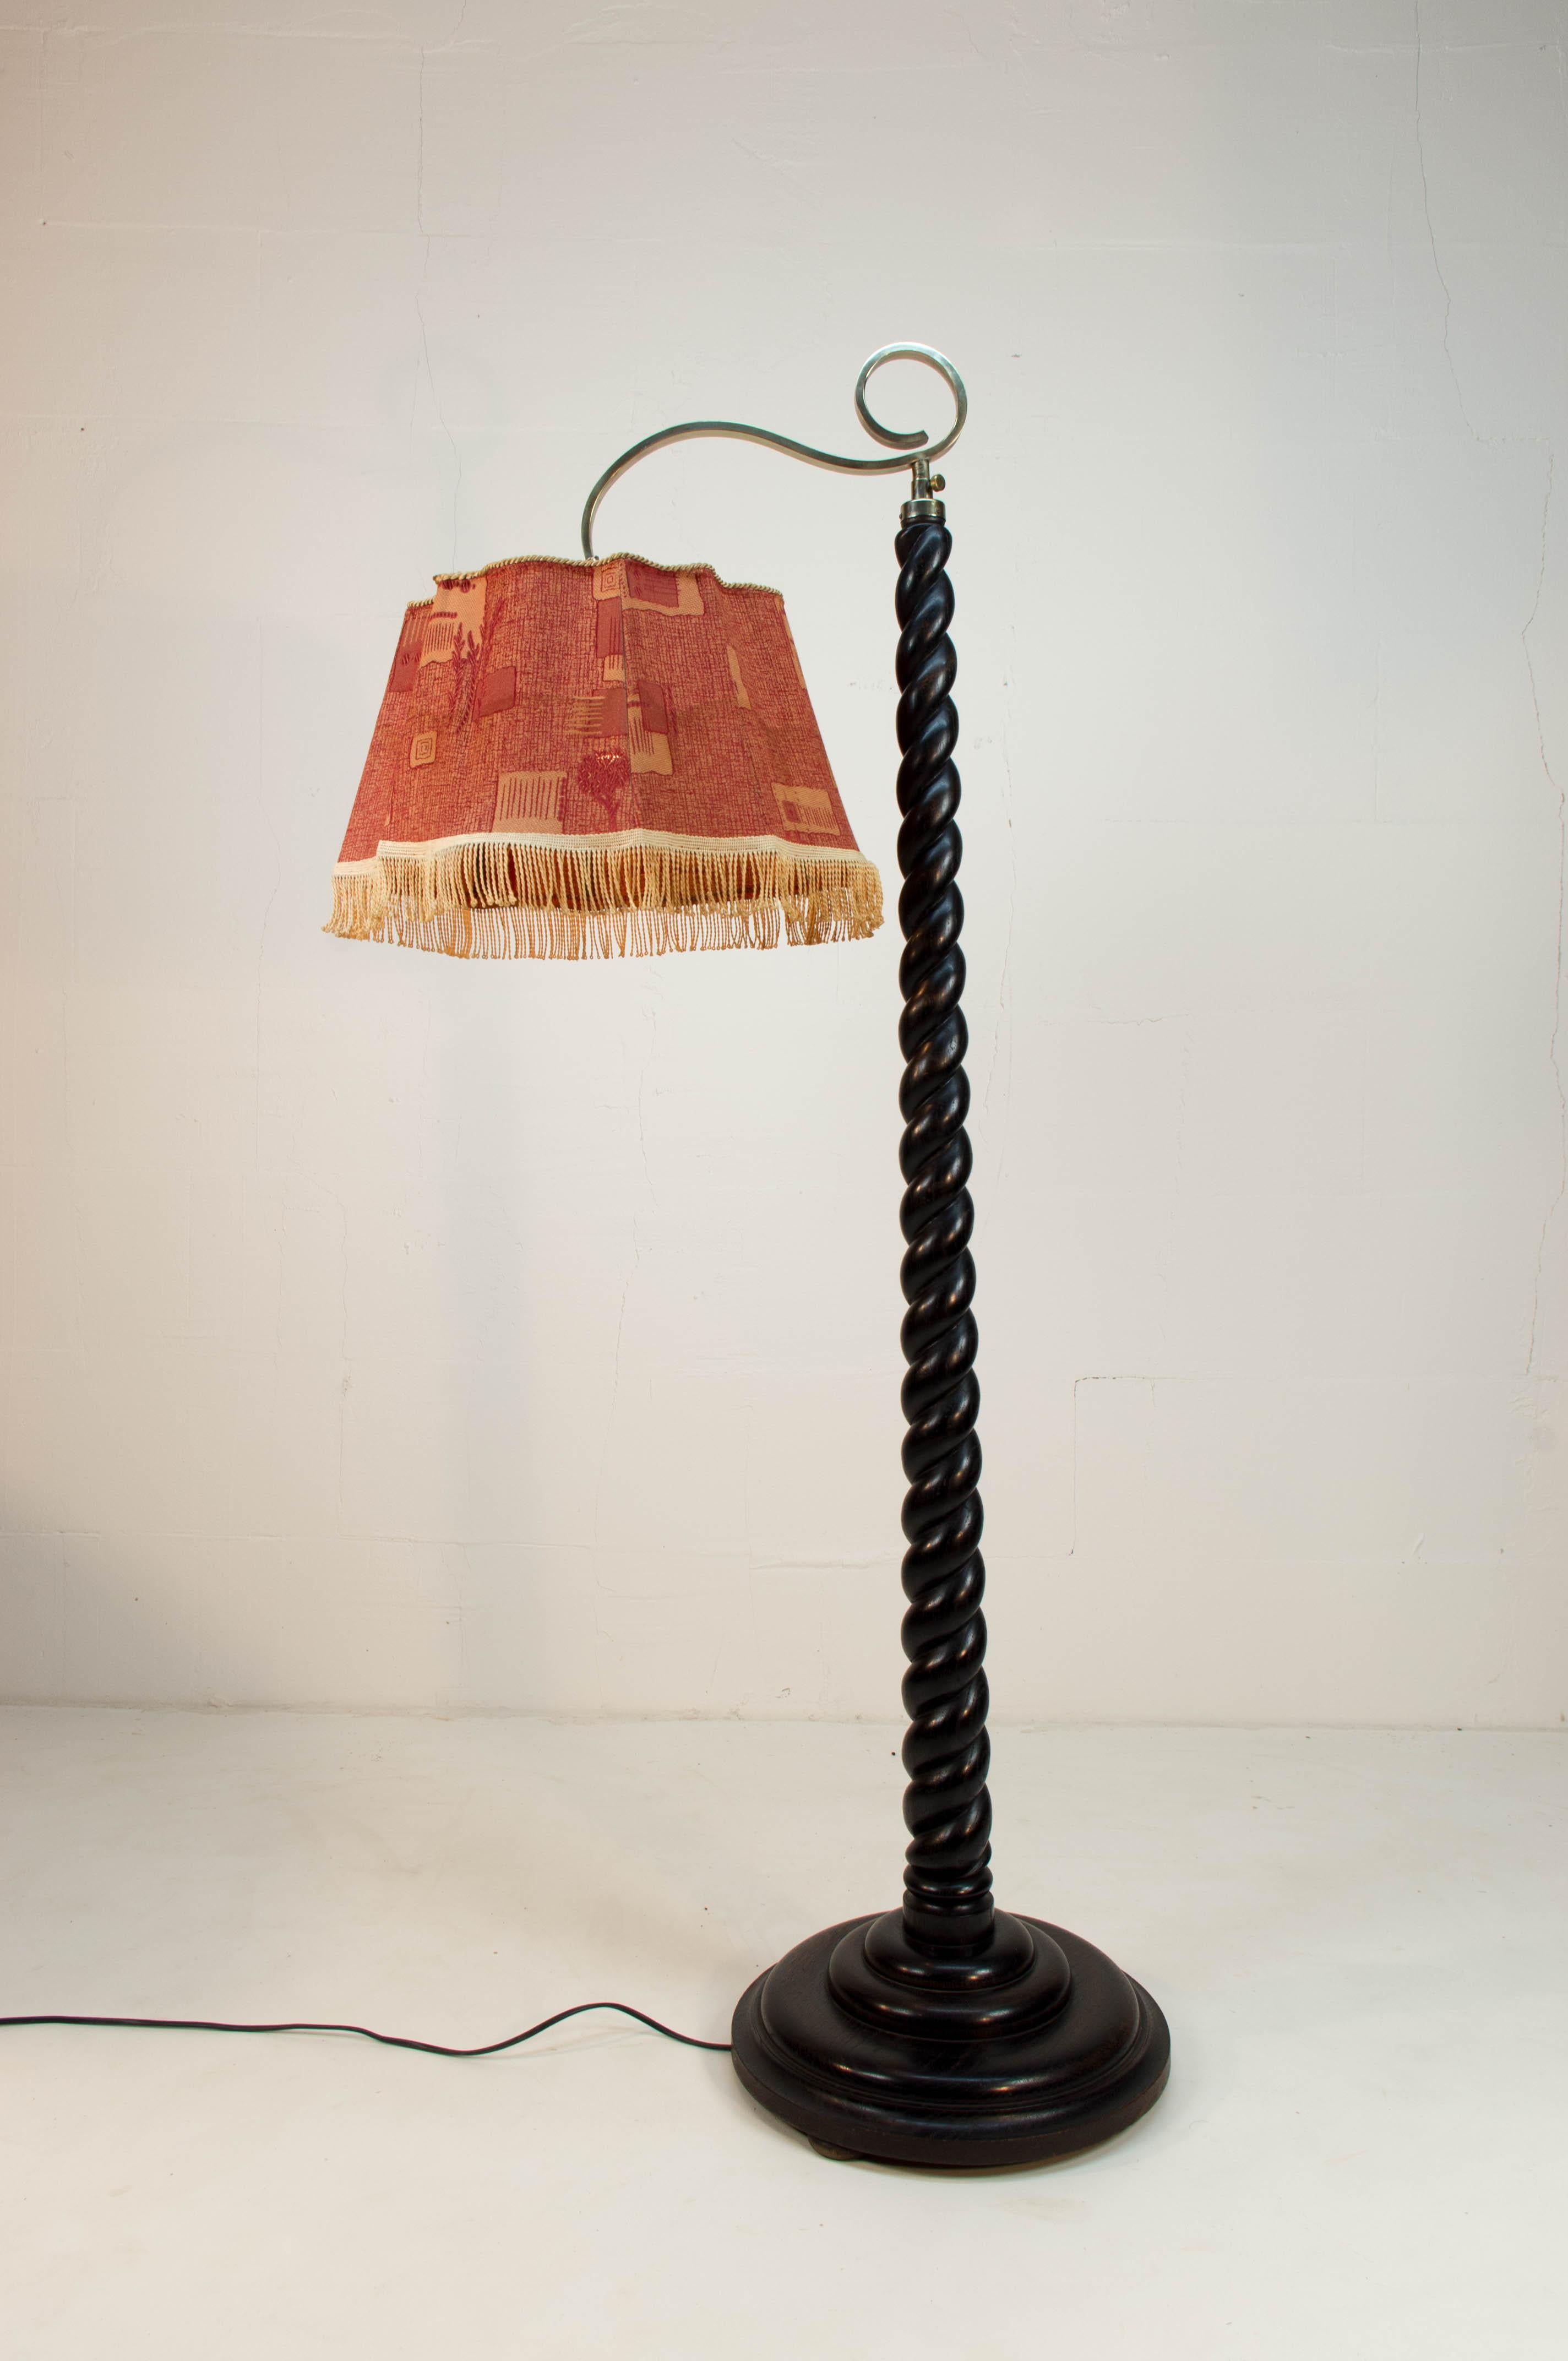 Stand in excellent condition, textile on a shade has some darker spots seen on photos.
Measures: Adjustable height max. 197cm (77in), min. 151 (59in)
Adjustable shade.